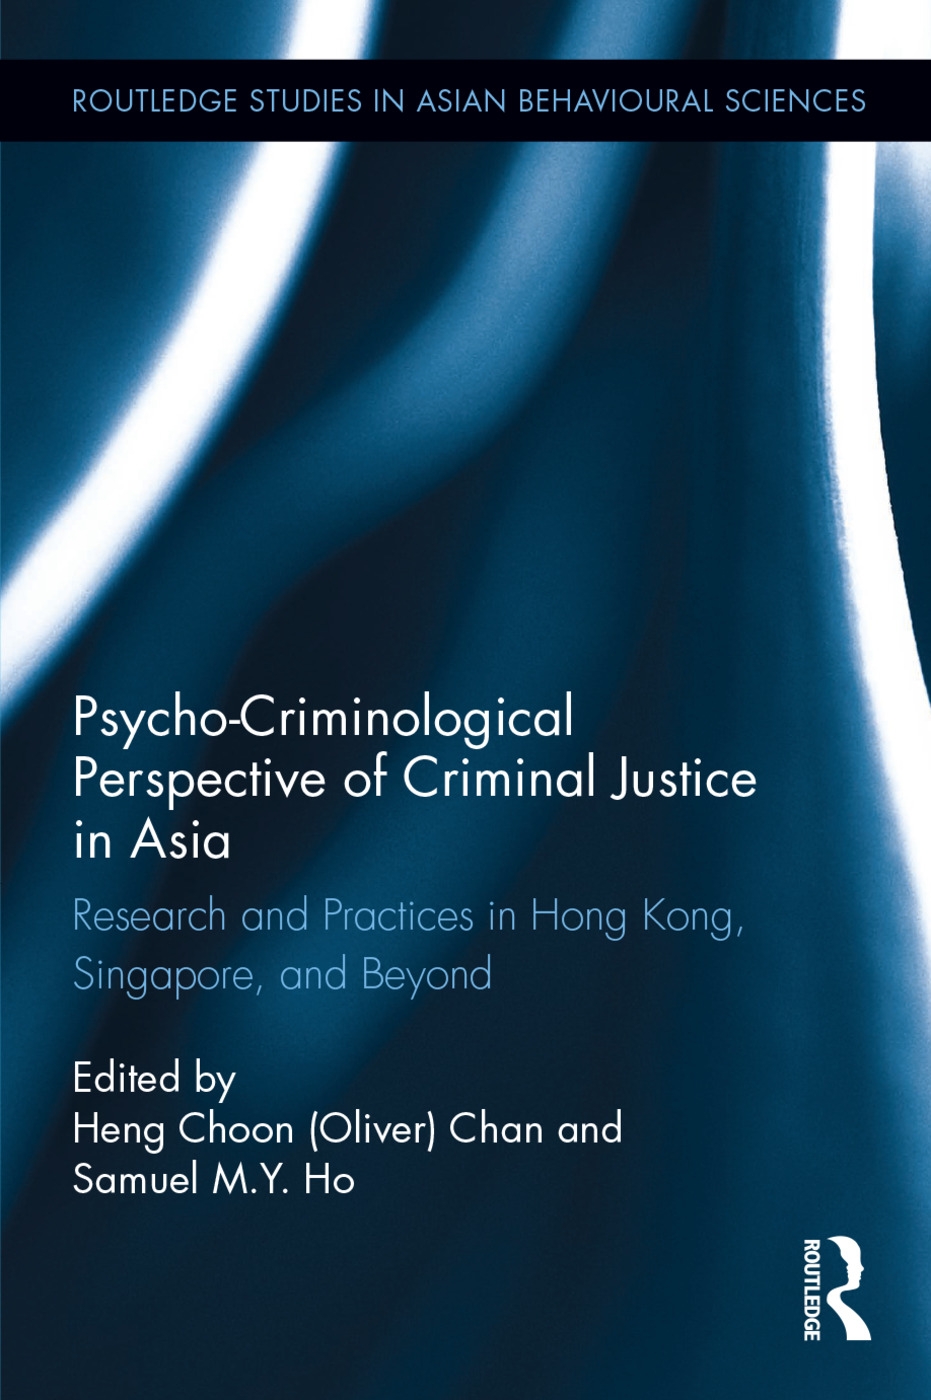 Psycho-Criminological Perspective of Criminal Justice in Asia: Research and Practices in Hong Kong, Singapore, and Beyond